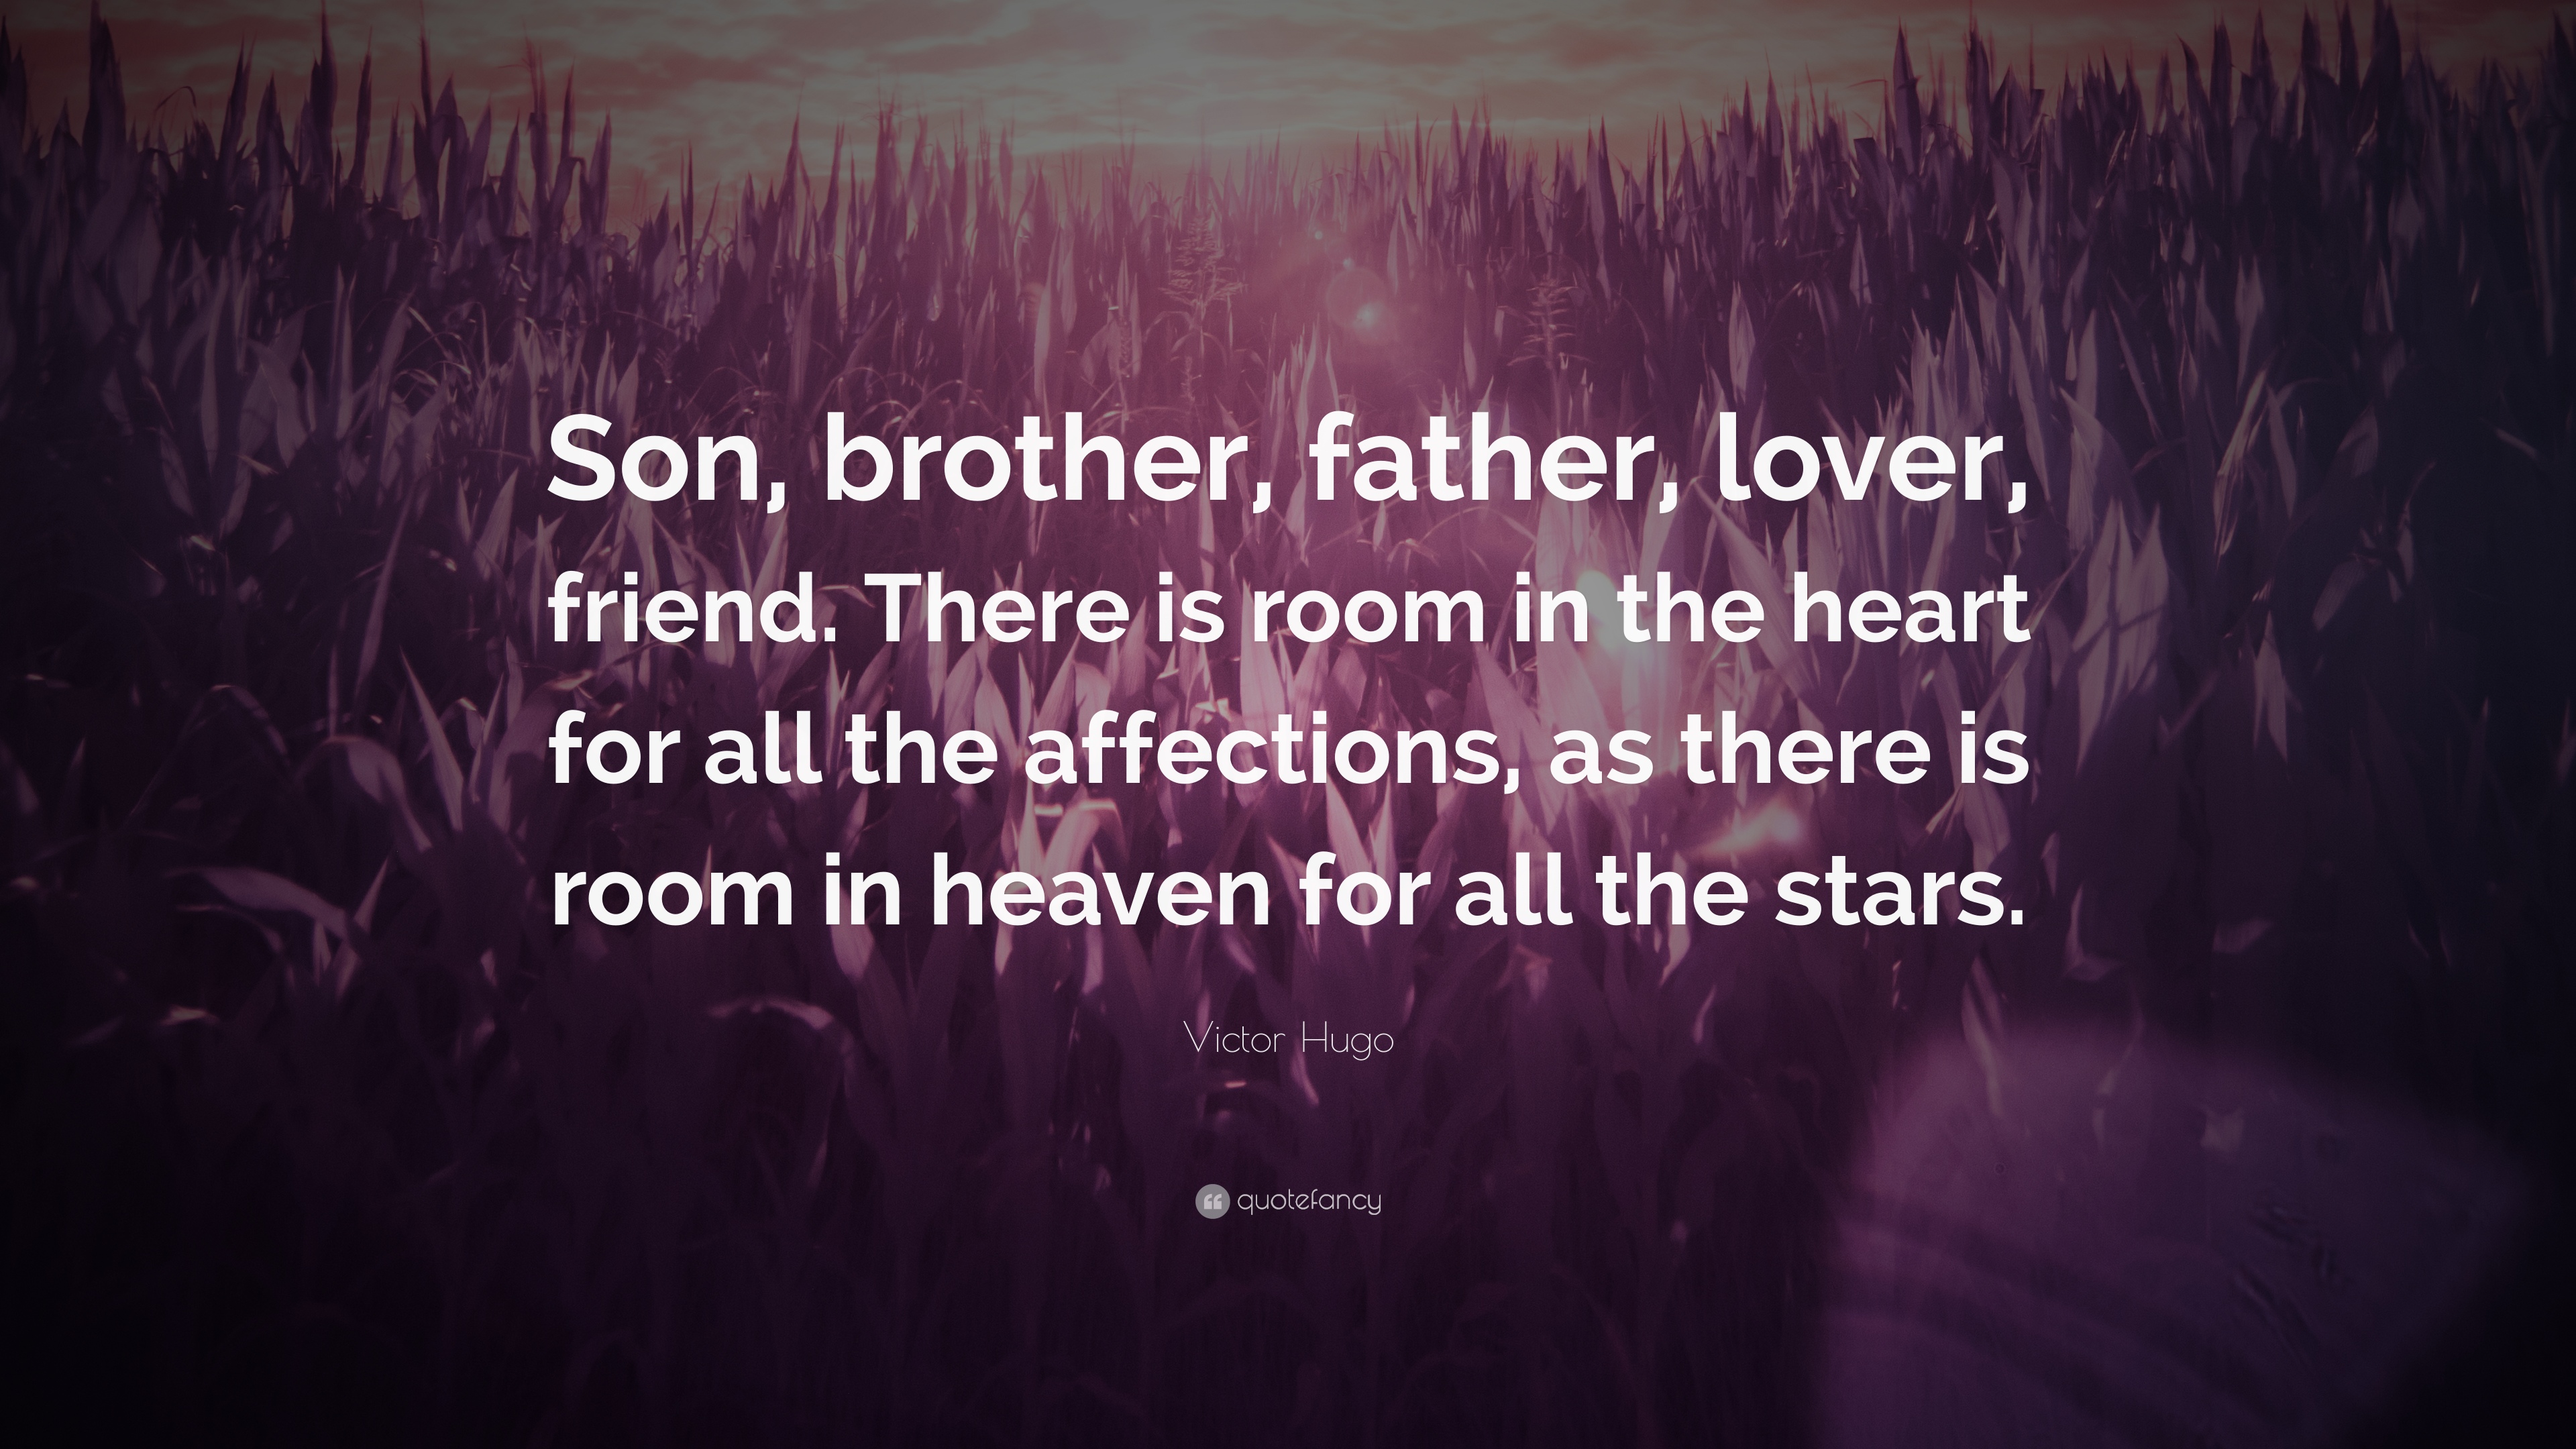 Victor Hugo Quote: “Son, brother, father, lover, friend. There is ...